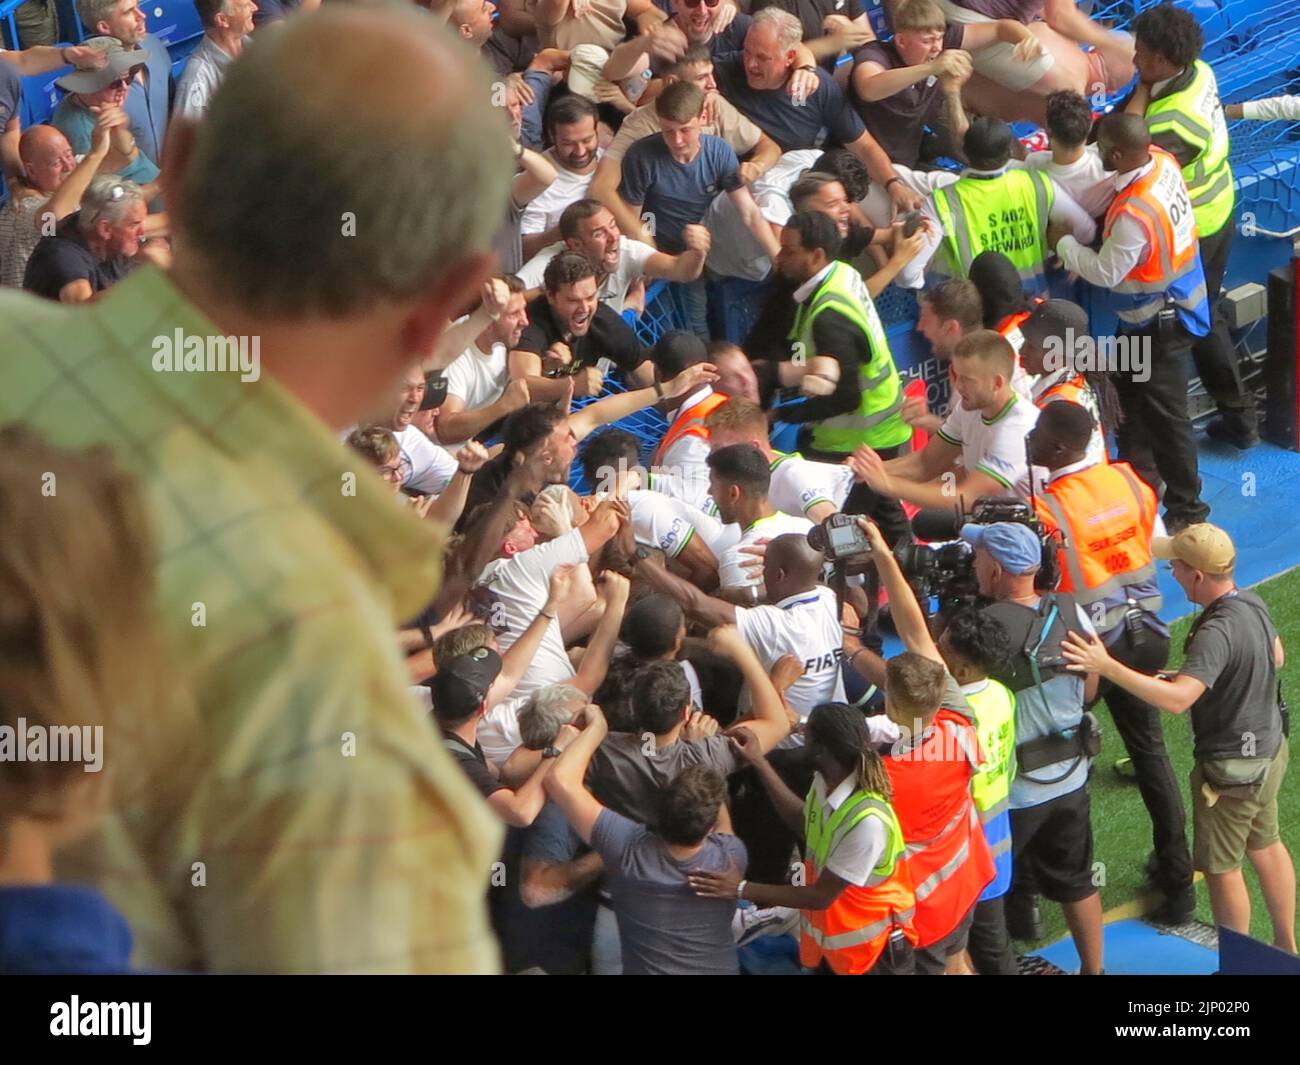 Chelsea, London, UK. 14th Aug, 2022. Tottenham Hotspur FC fans and players celebrate their second goal scored by Harry Kane during the first game of the 2022/23 season at Stamford Bridge. The game ended as a 2-2 draw. Credit: Motofoto/Alamy Live News Stock Photo